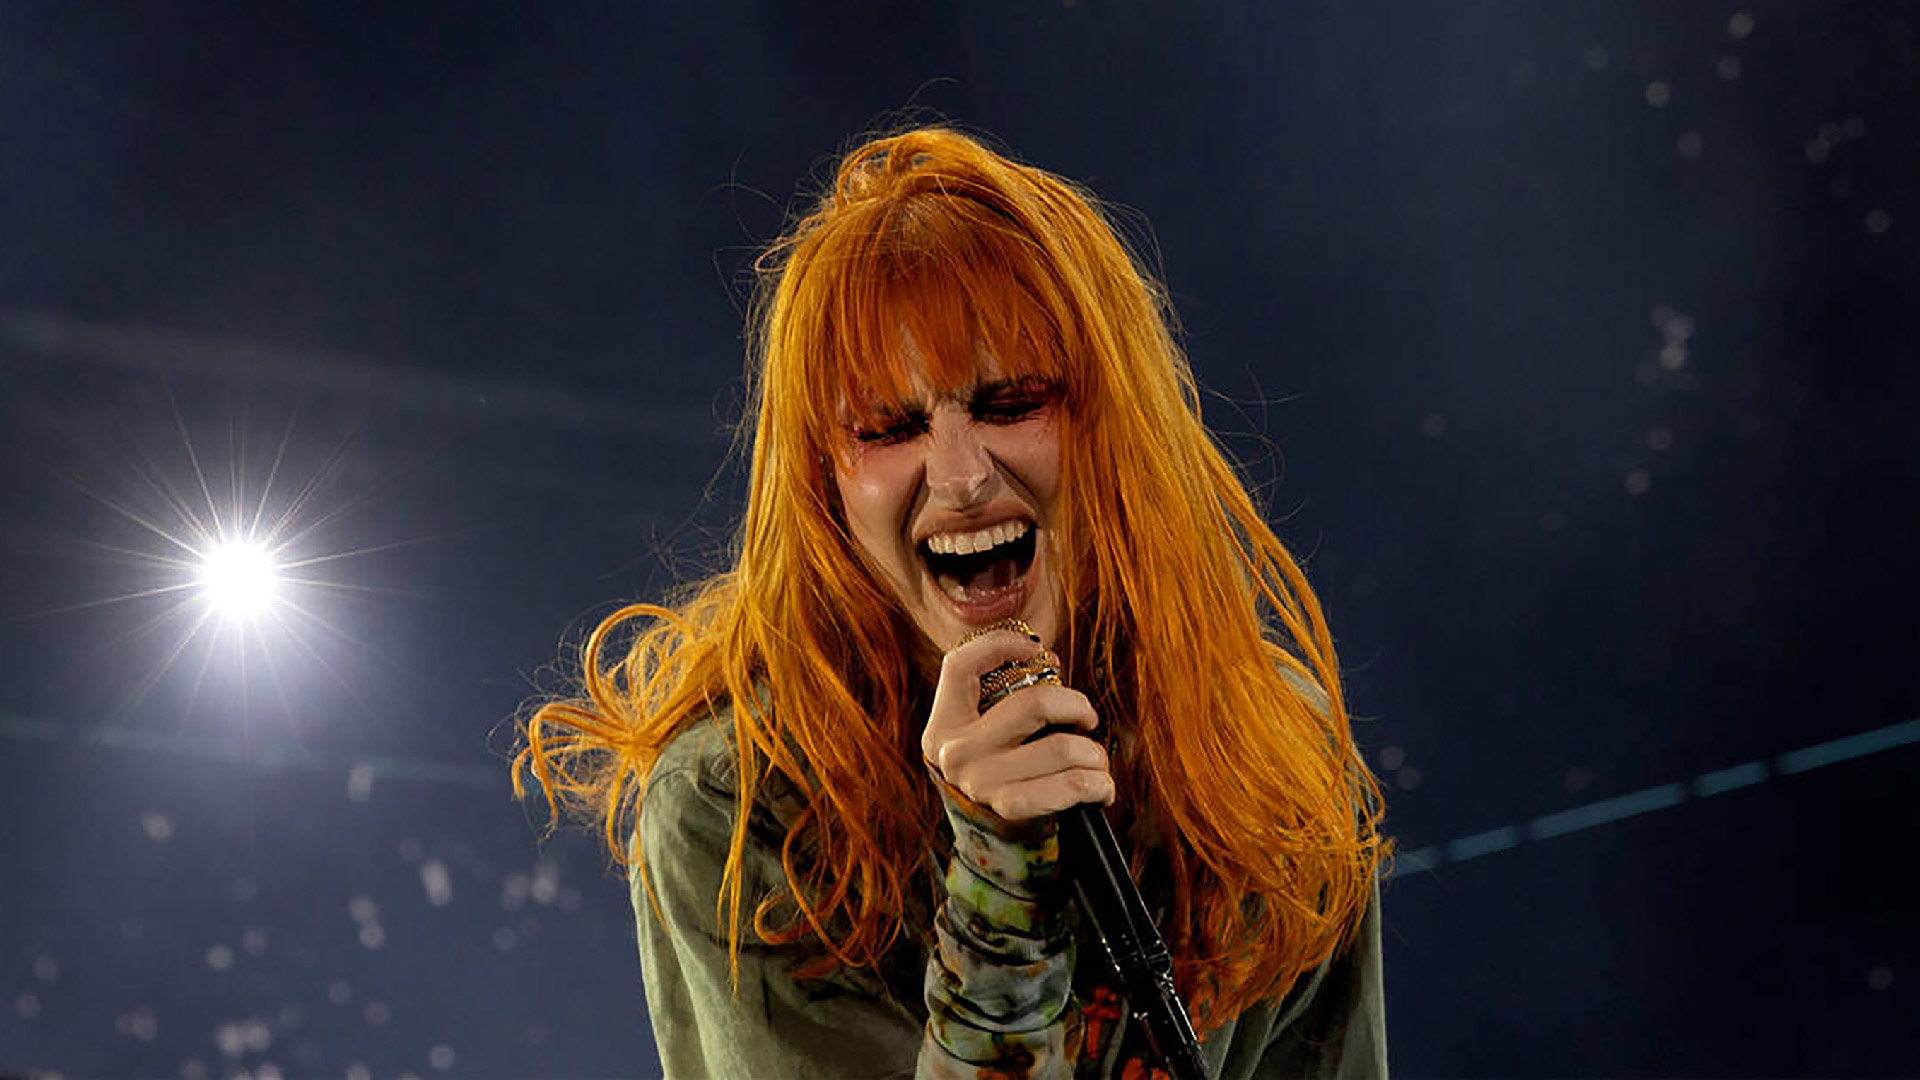 Paramore singer Hayley Williams performs during When We Were Young music festival at the Las Vegas Festival Grounds on Oct. 23, 2022, in Las Vegas.